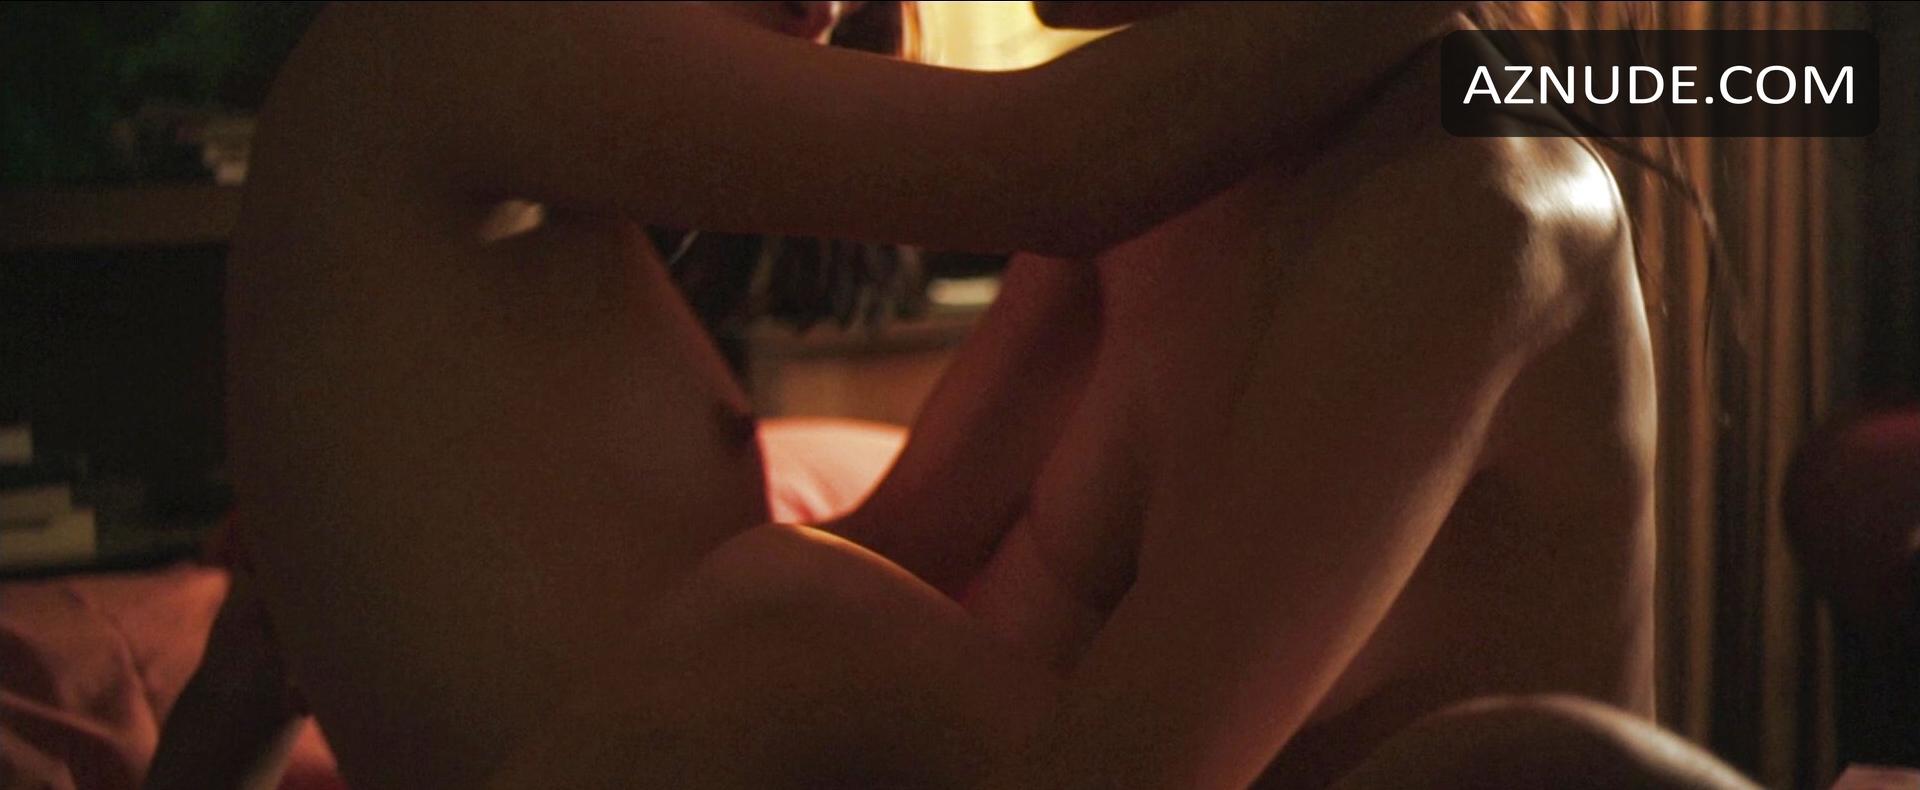 Browse Celebrity Nipple Images Page 2 Aznude